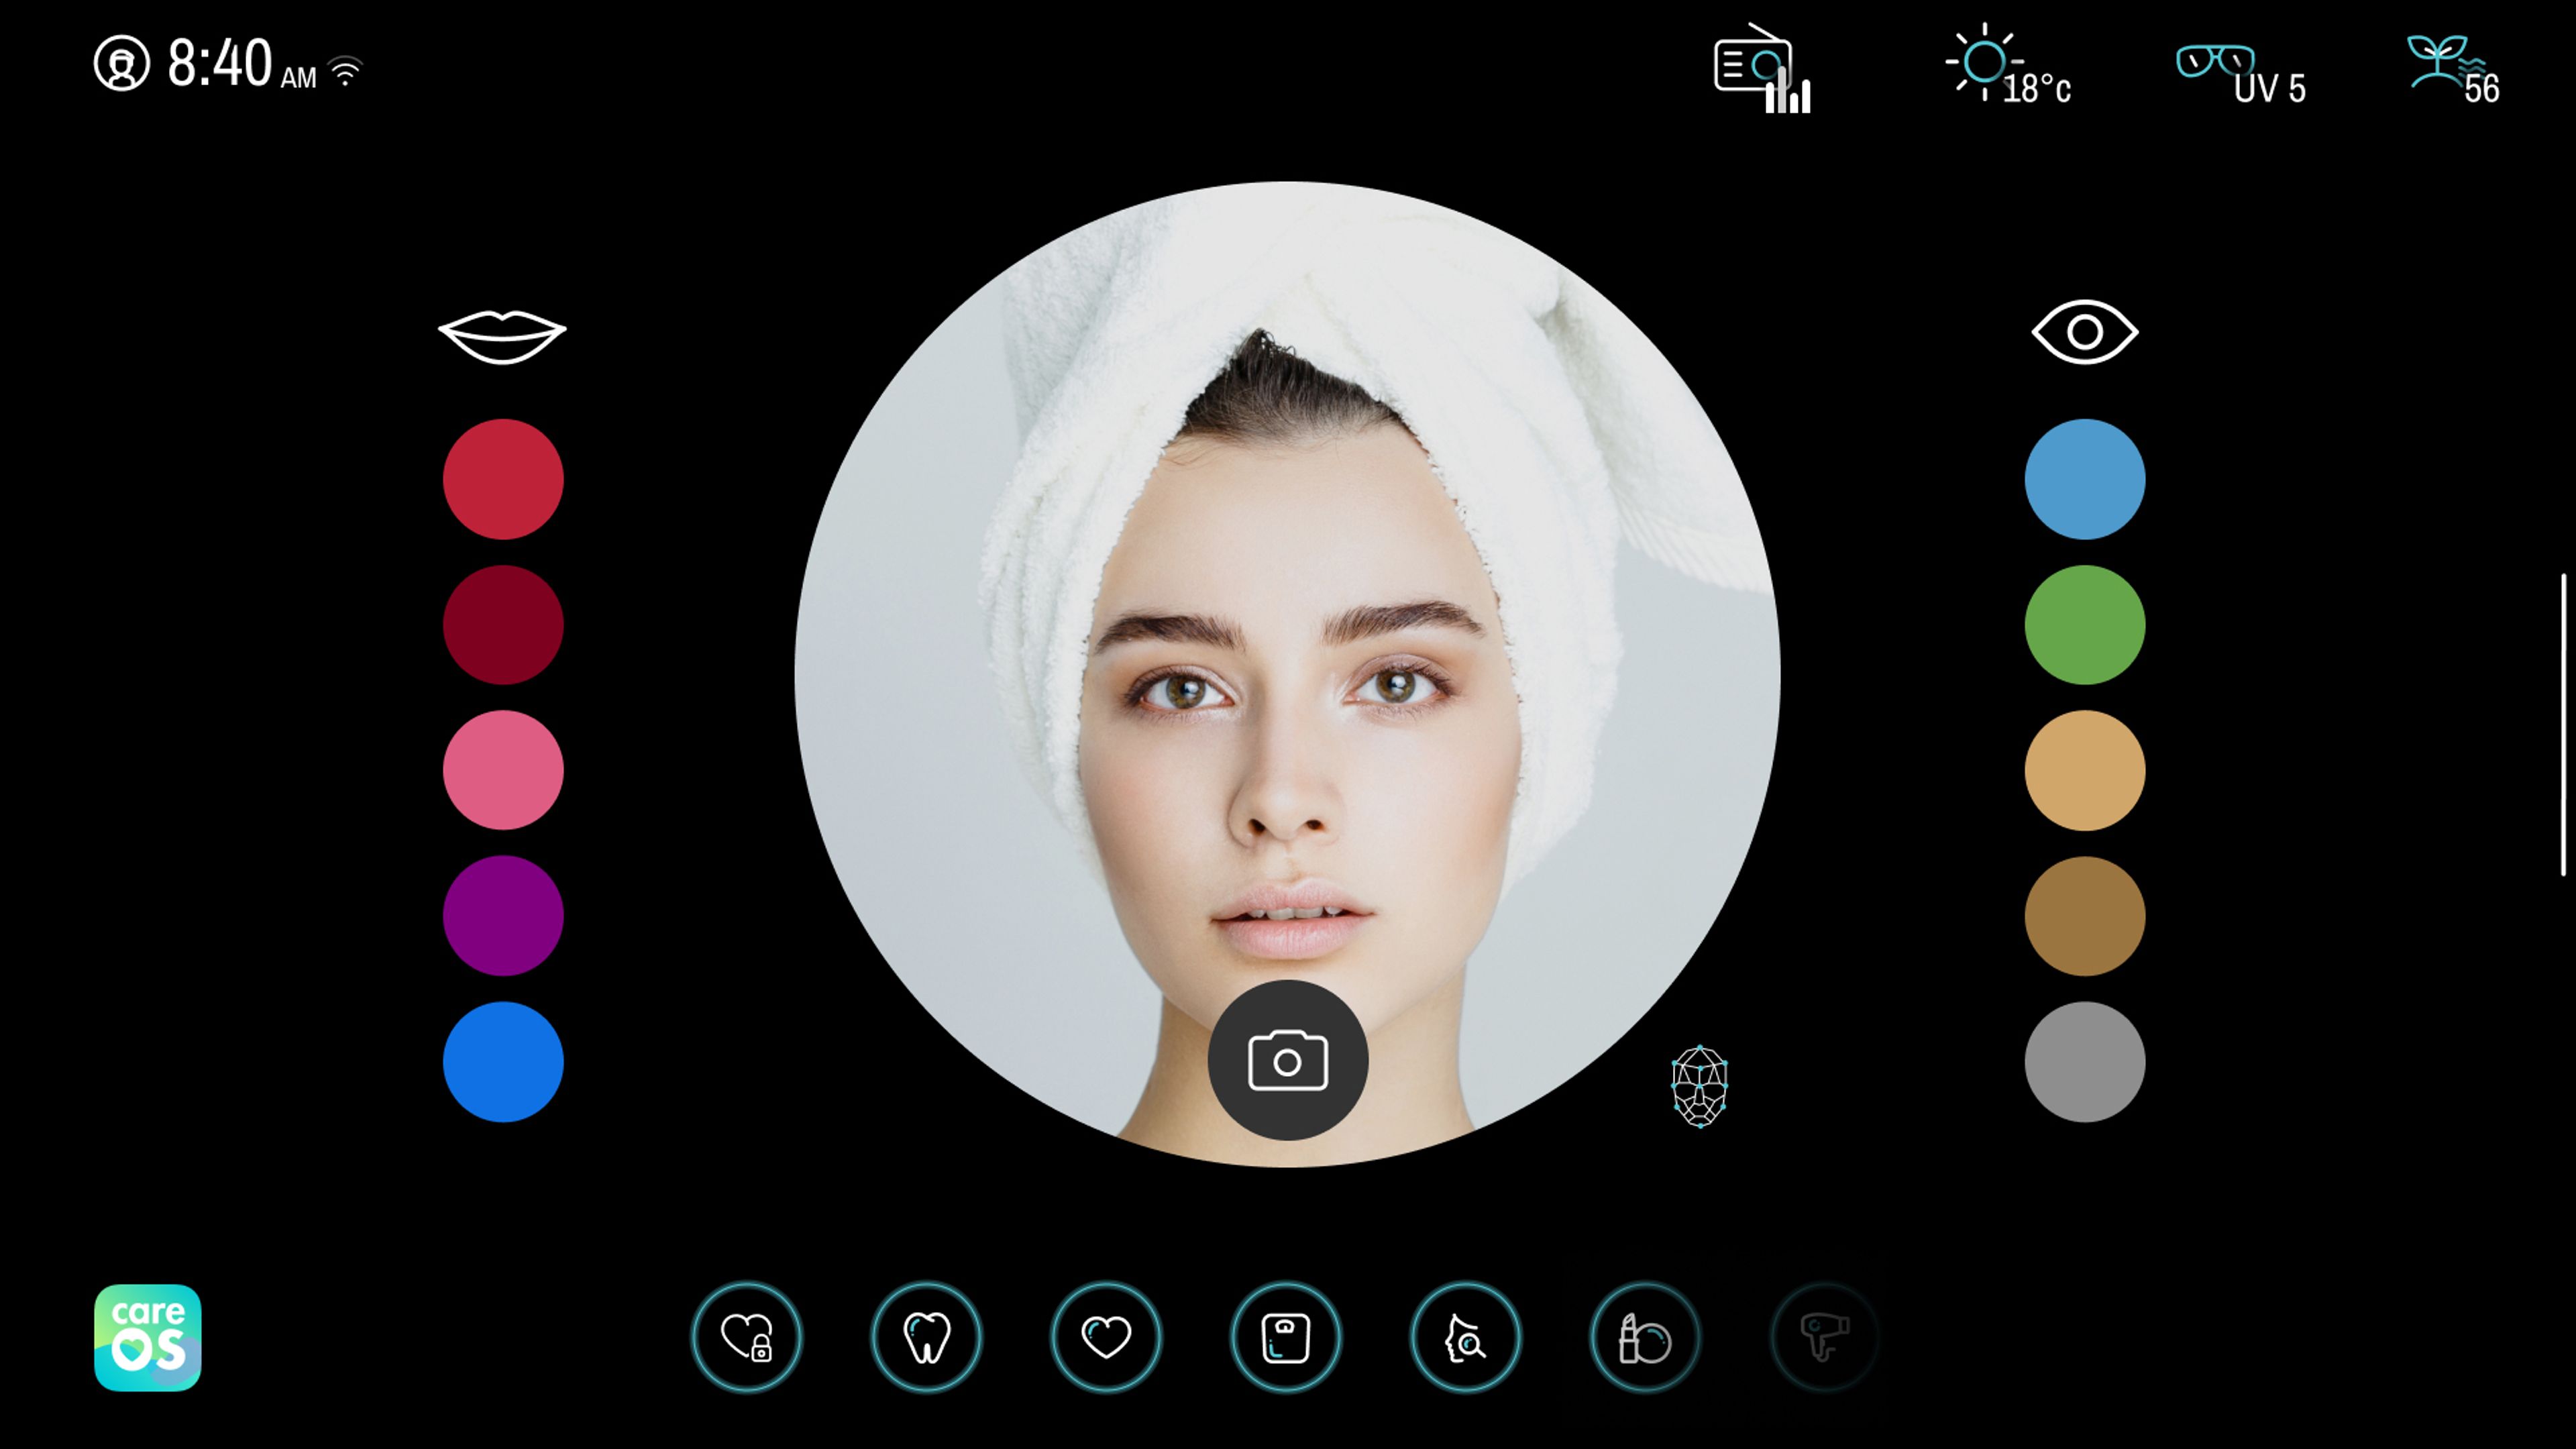 The future of connected beauty starts now